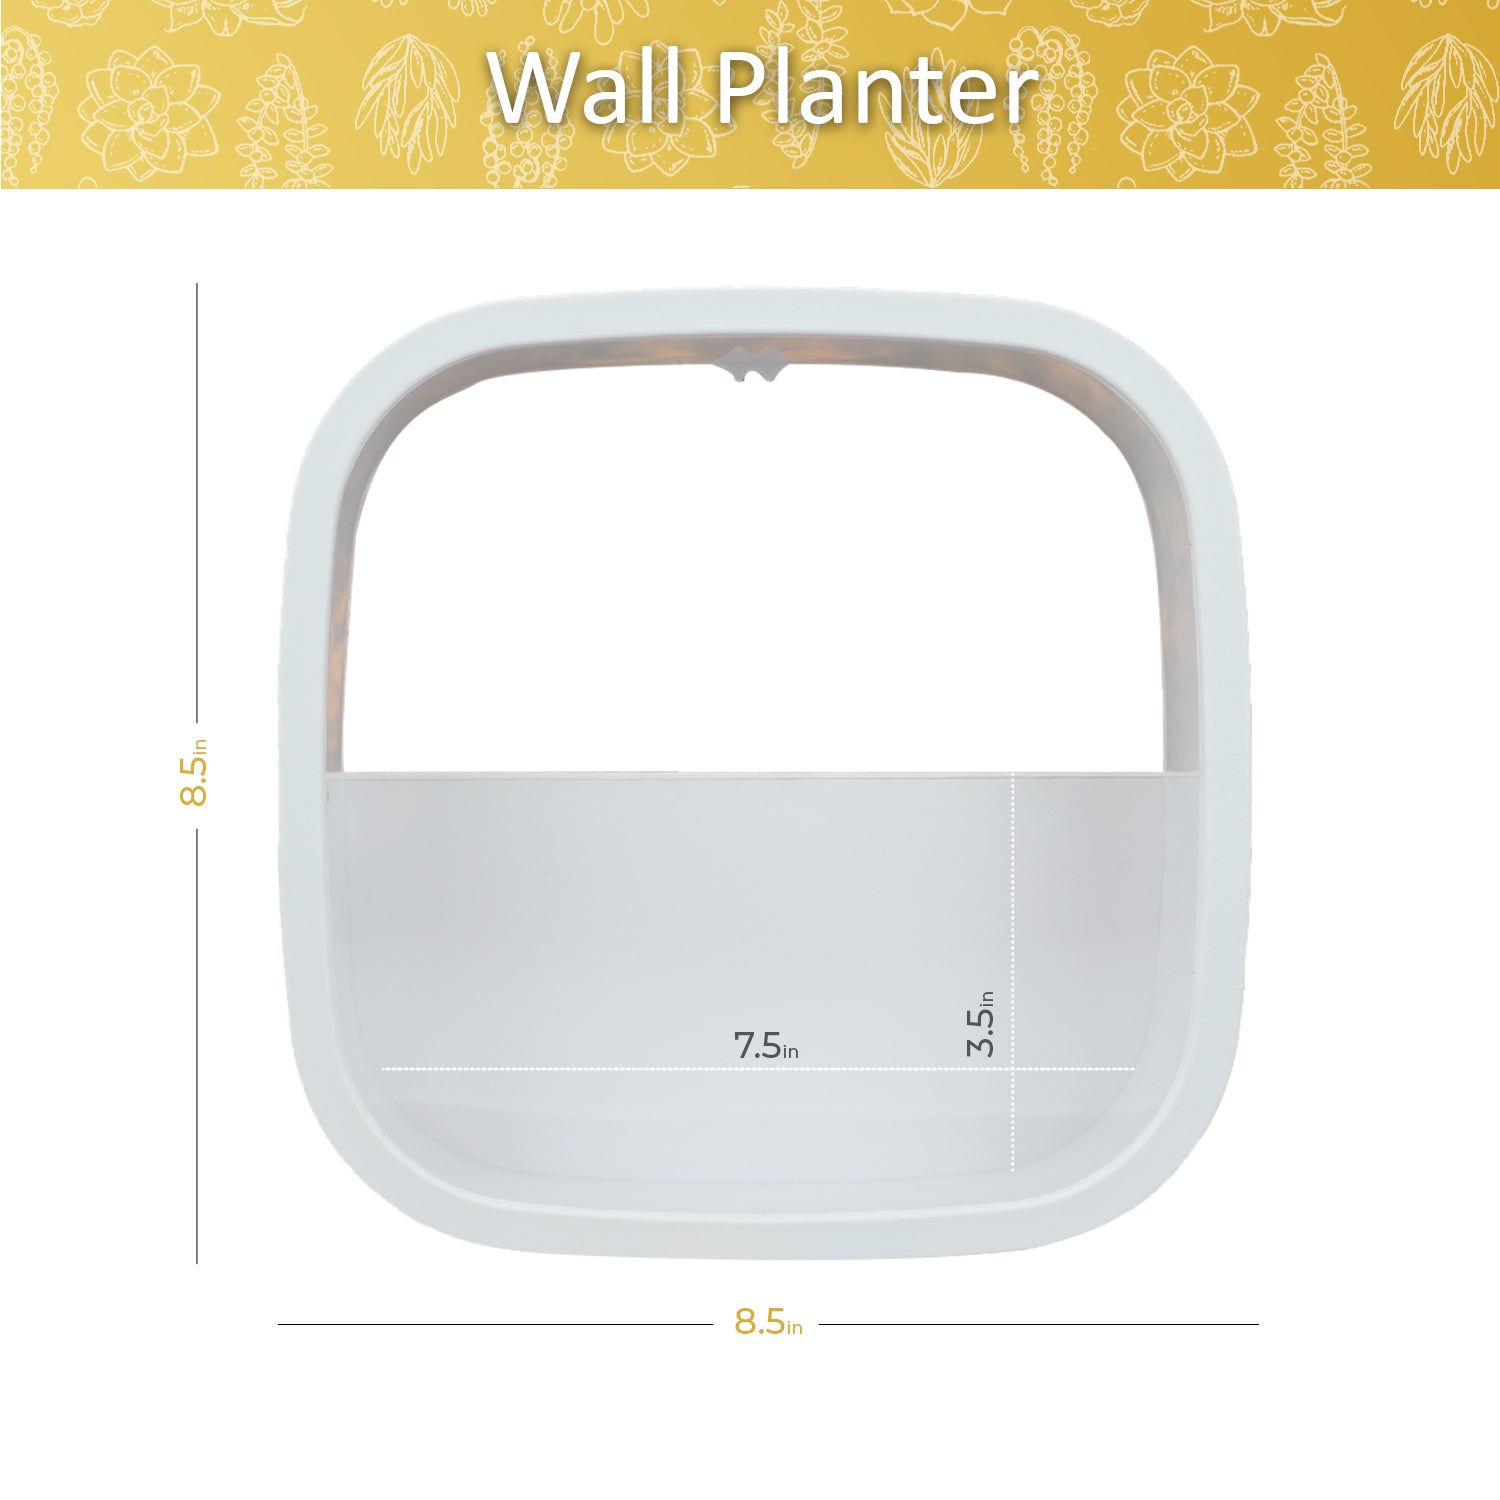 Hanging Decorative Plant Holder - Indoor and Outdoor Wall Planter - White